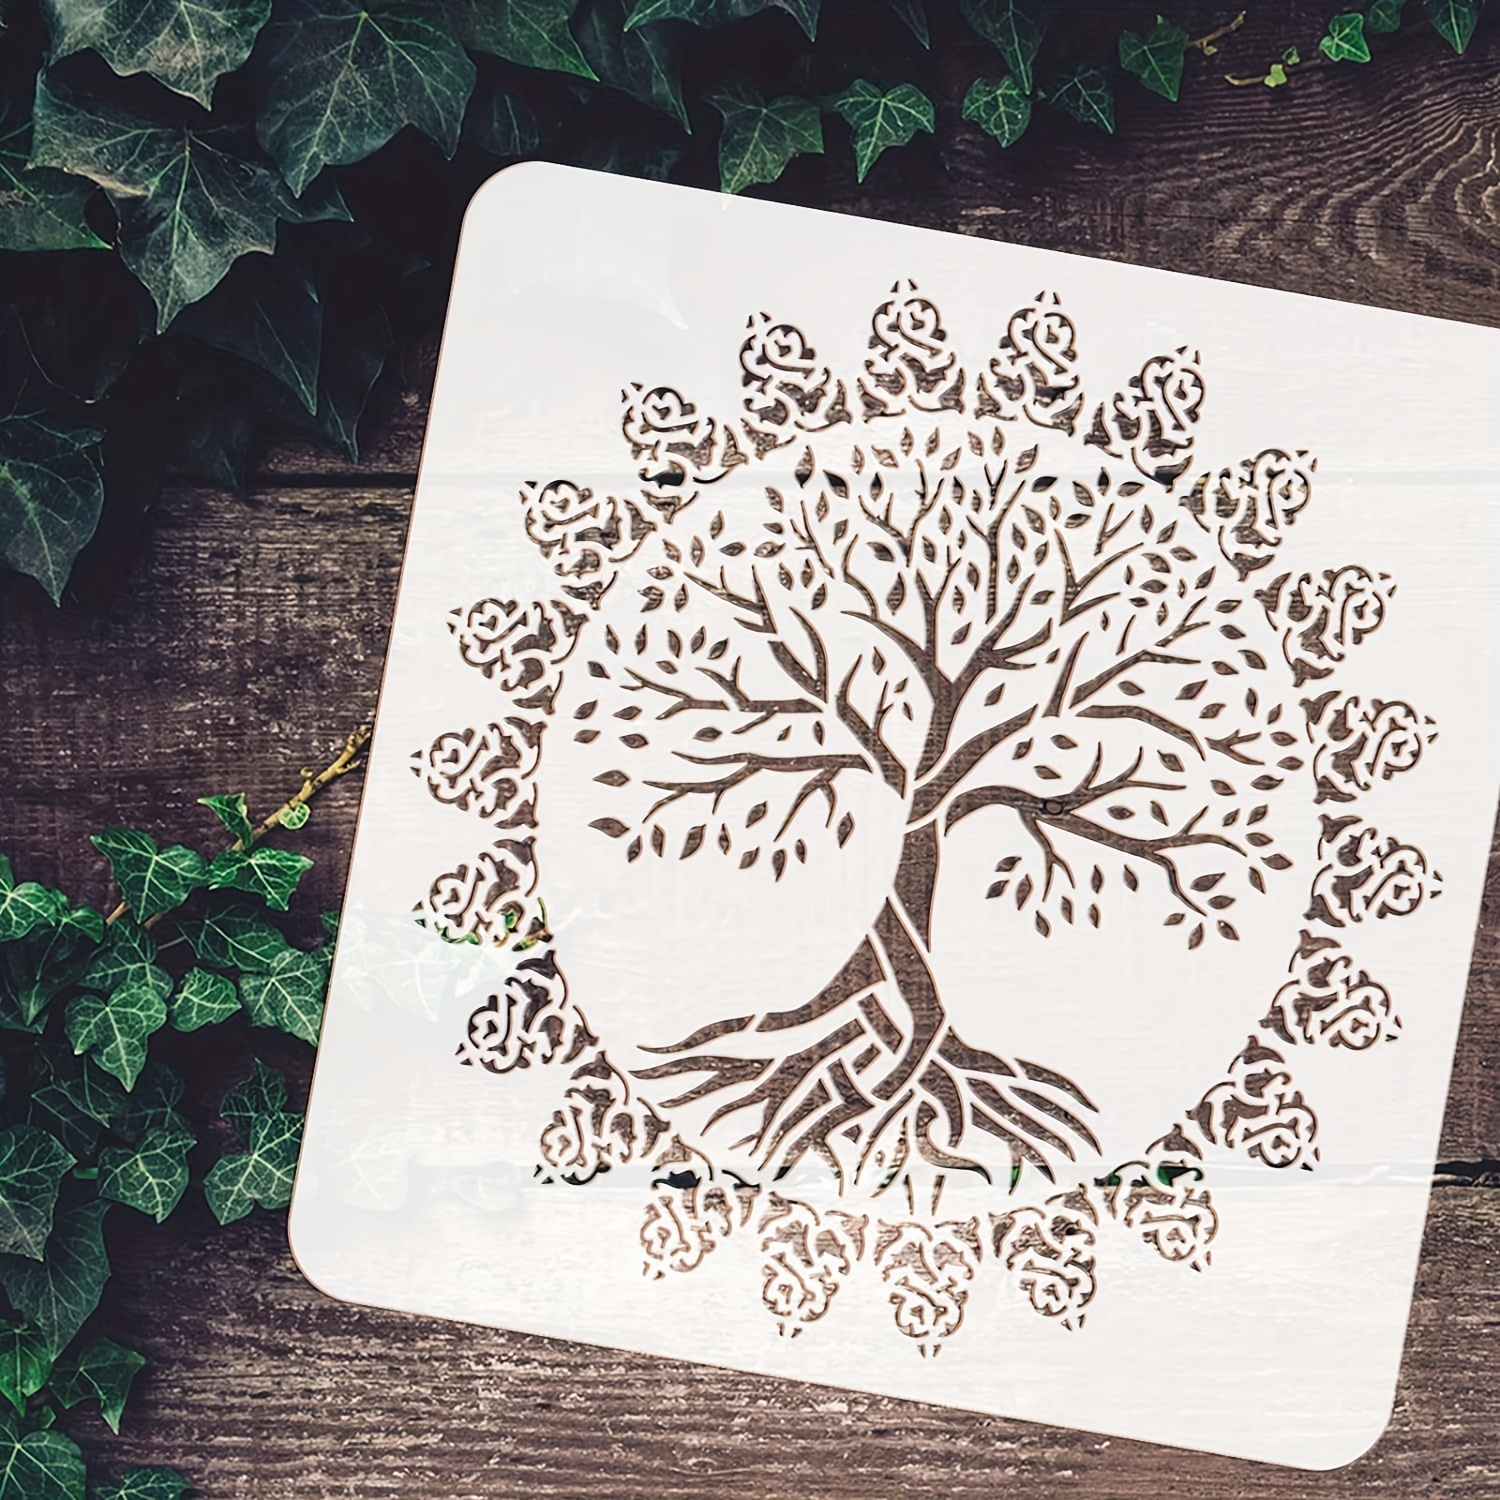 

1pc Mandala Tree Of Life Stencil 11.8x11.8inch Reusable Washable Painting Stencil Mandala Flower Template Round Flower Tree Pattern Stencil For Home School Wall Floor Door Decor